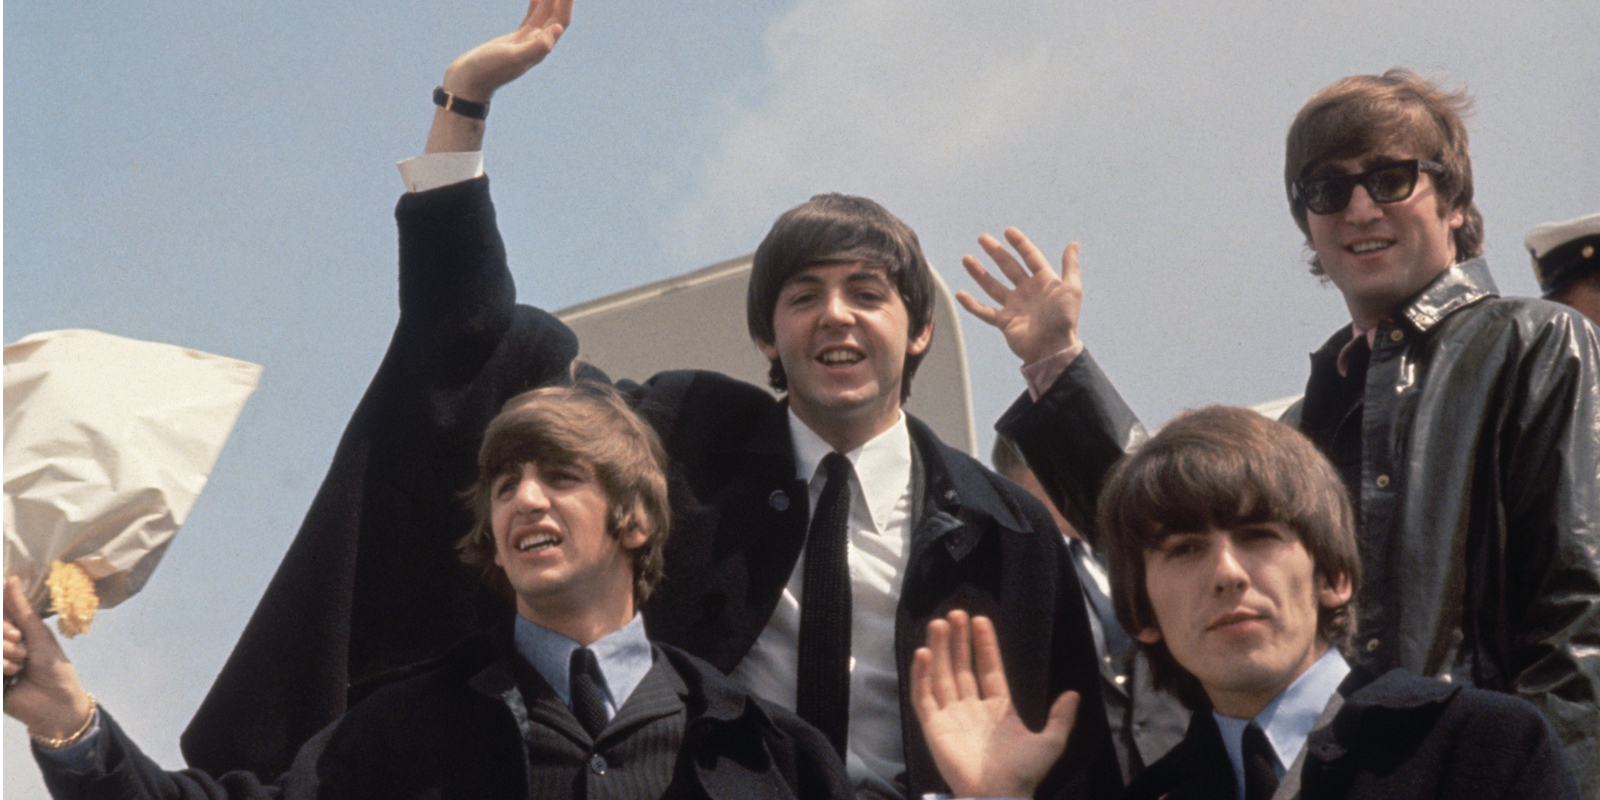 The Beatles (from left to right, John Lennon (1940 - 1980), George Harrison (1943 - 2001), Paul McCartney and Ringo Starr) arrive back at London Airport after their Australian tour.